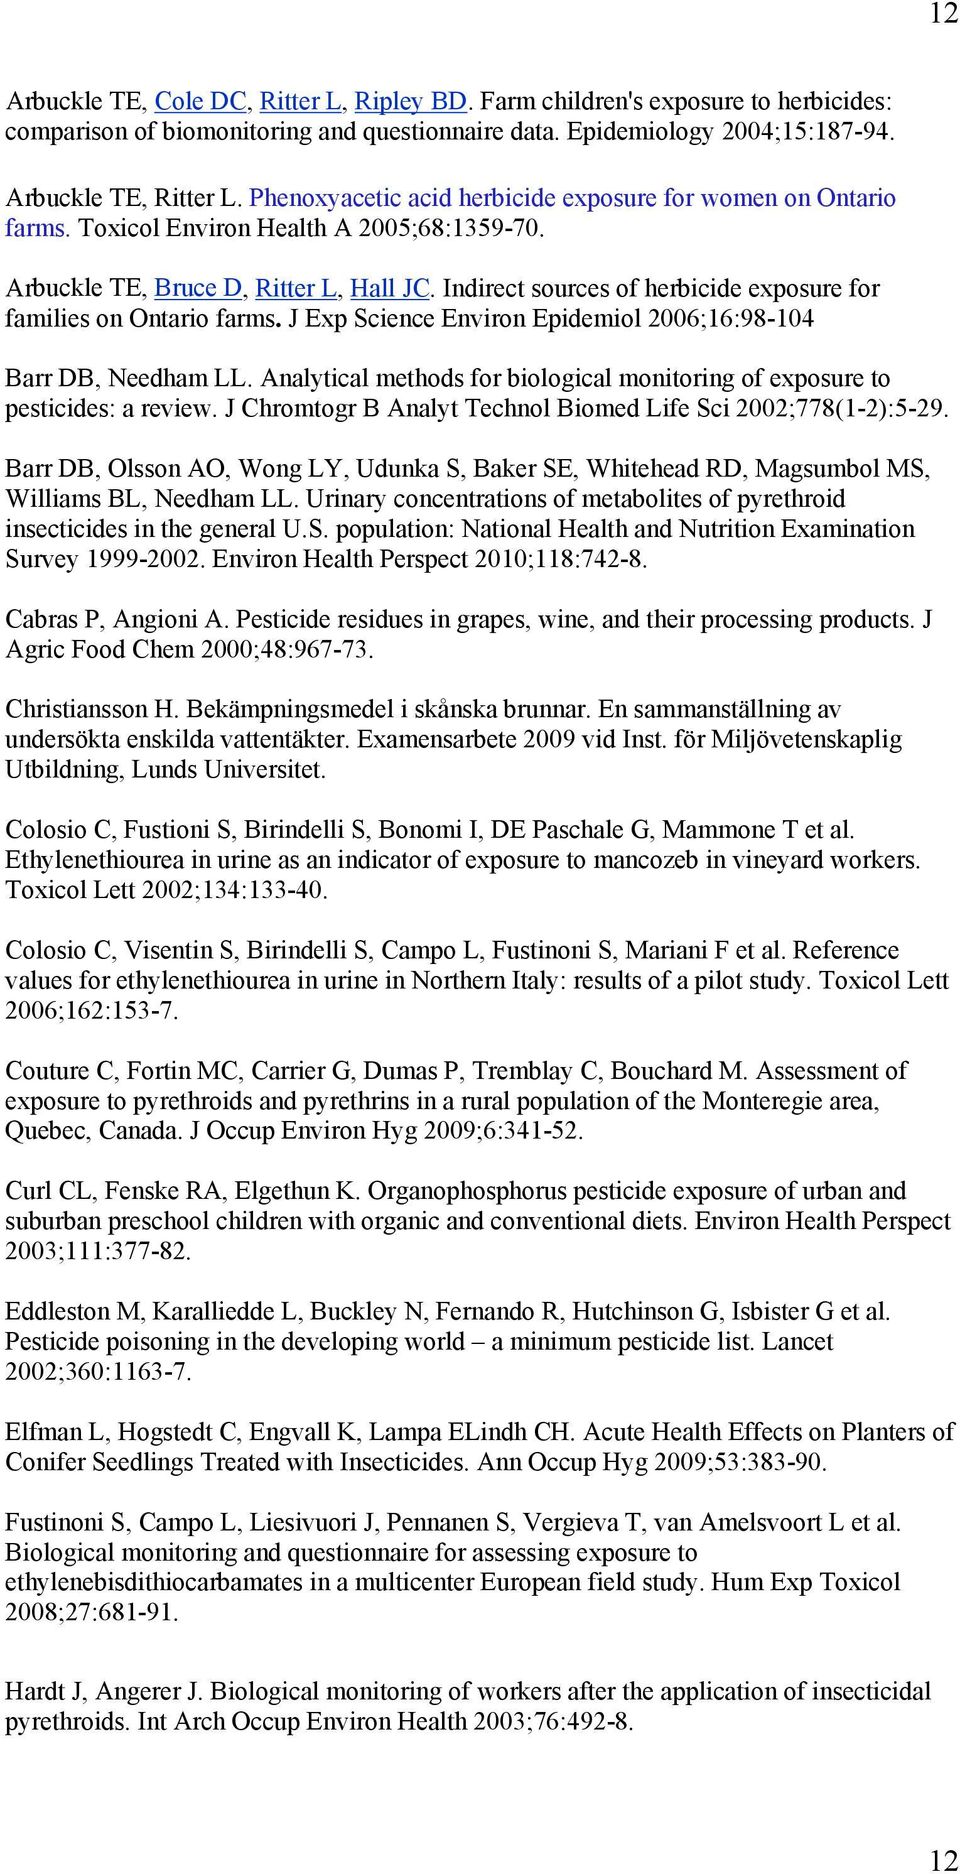 Indirect sources of herbicide exposure for families on Ontario farms. J Exp Science Environ Epidemiol 2006;16:98-104 Barr DB, Needham LL.